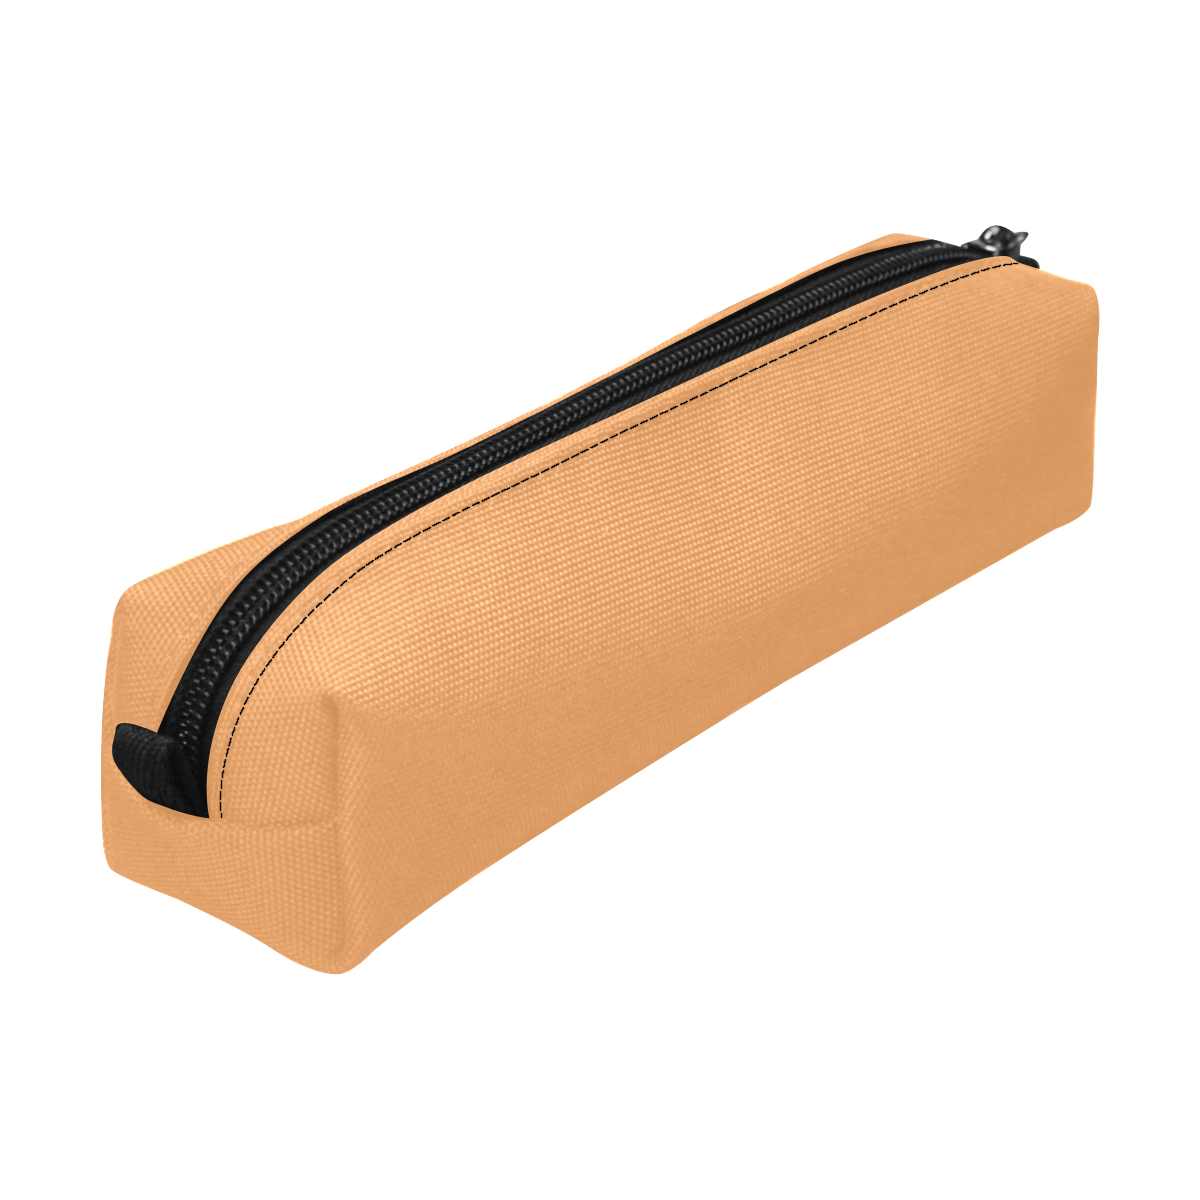 color sandy brown Pencil Pouch/Small (Model 1681)